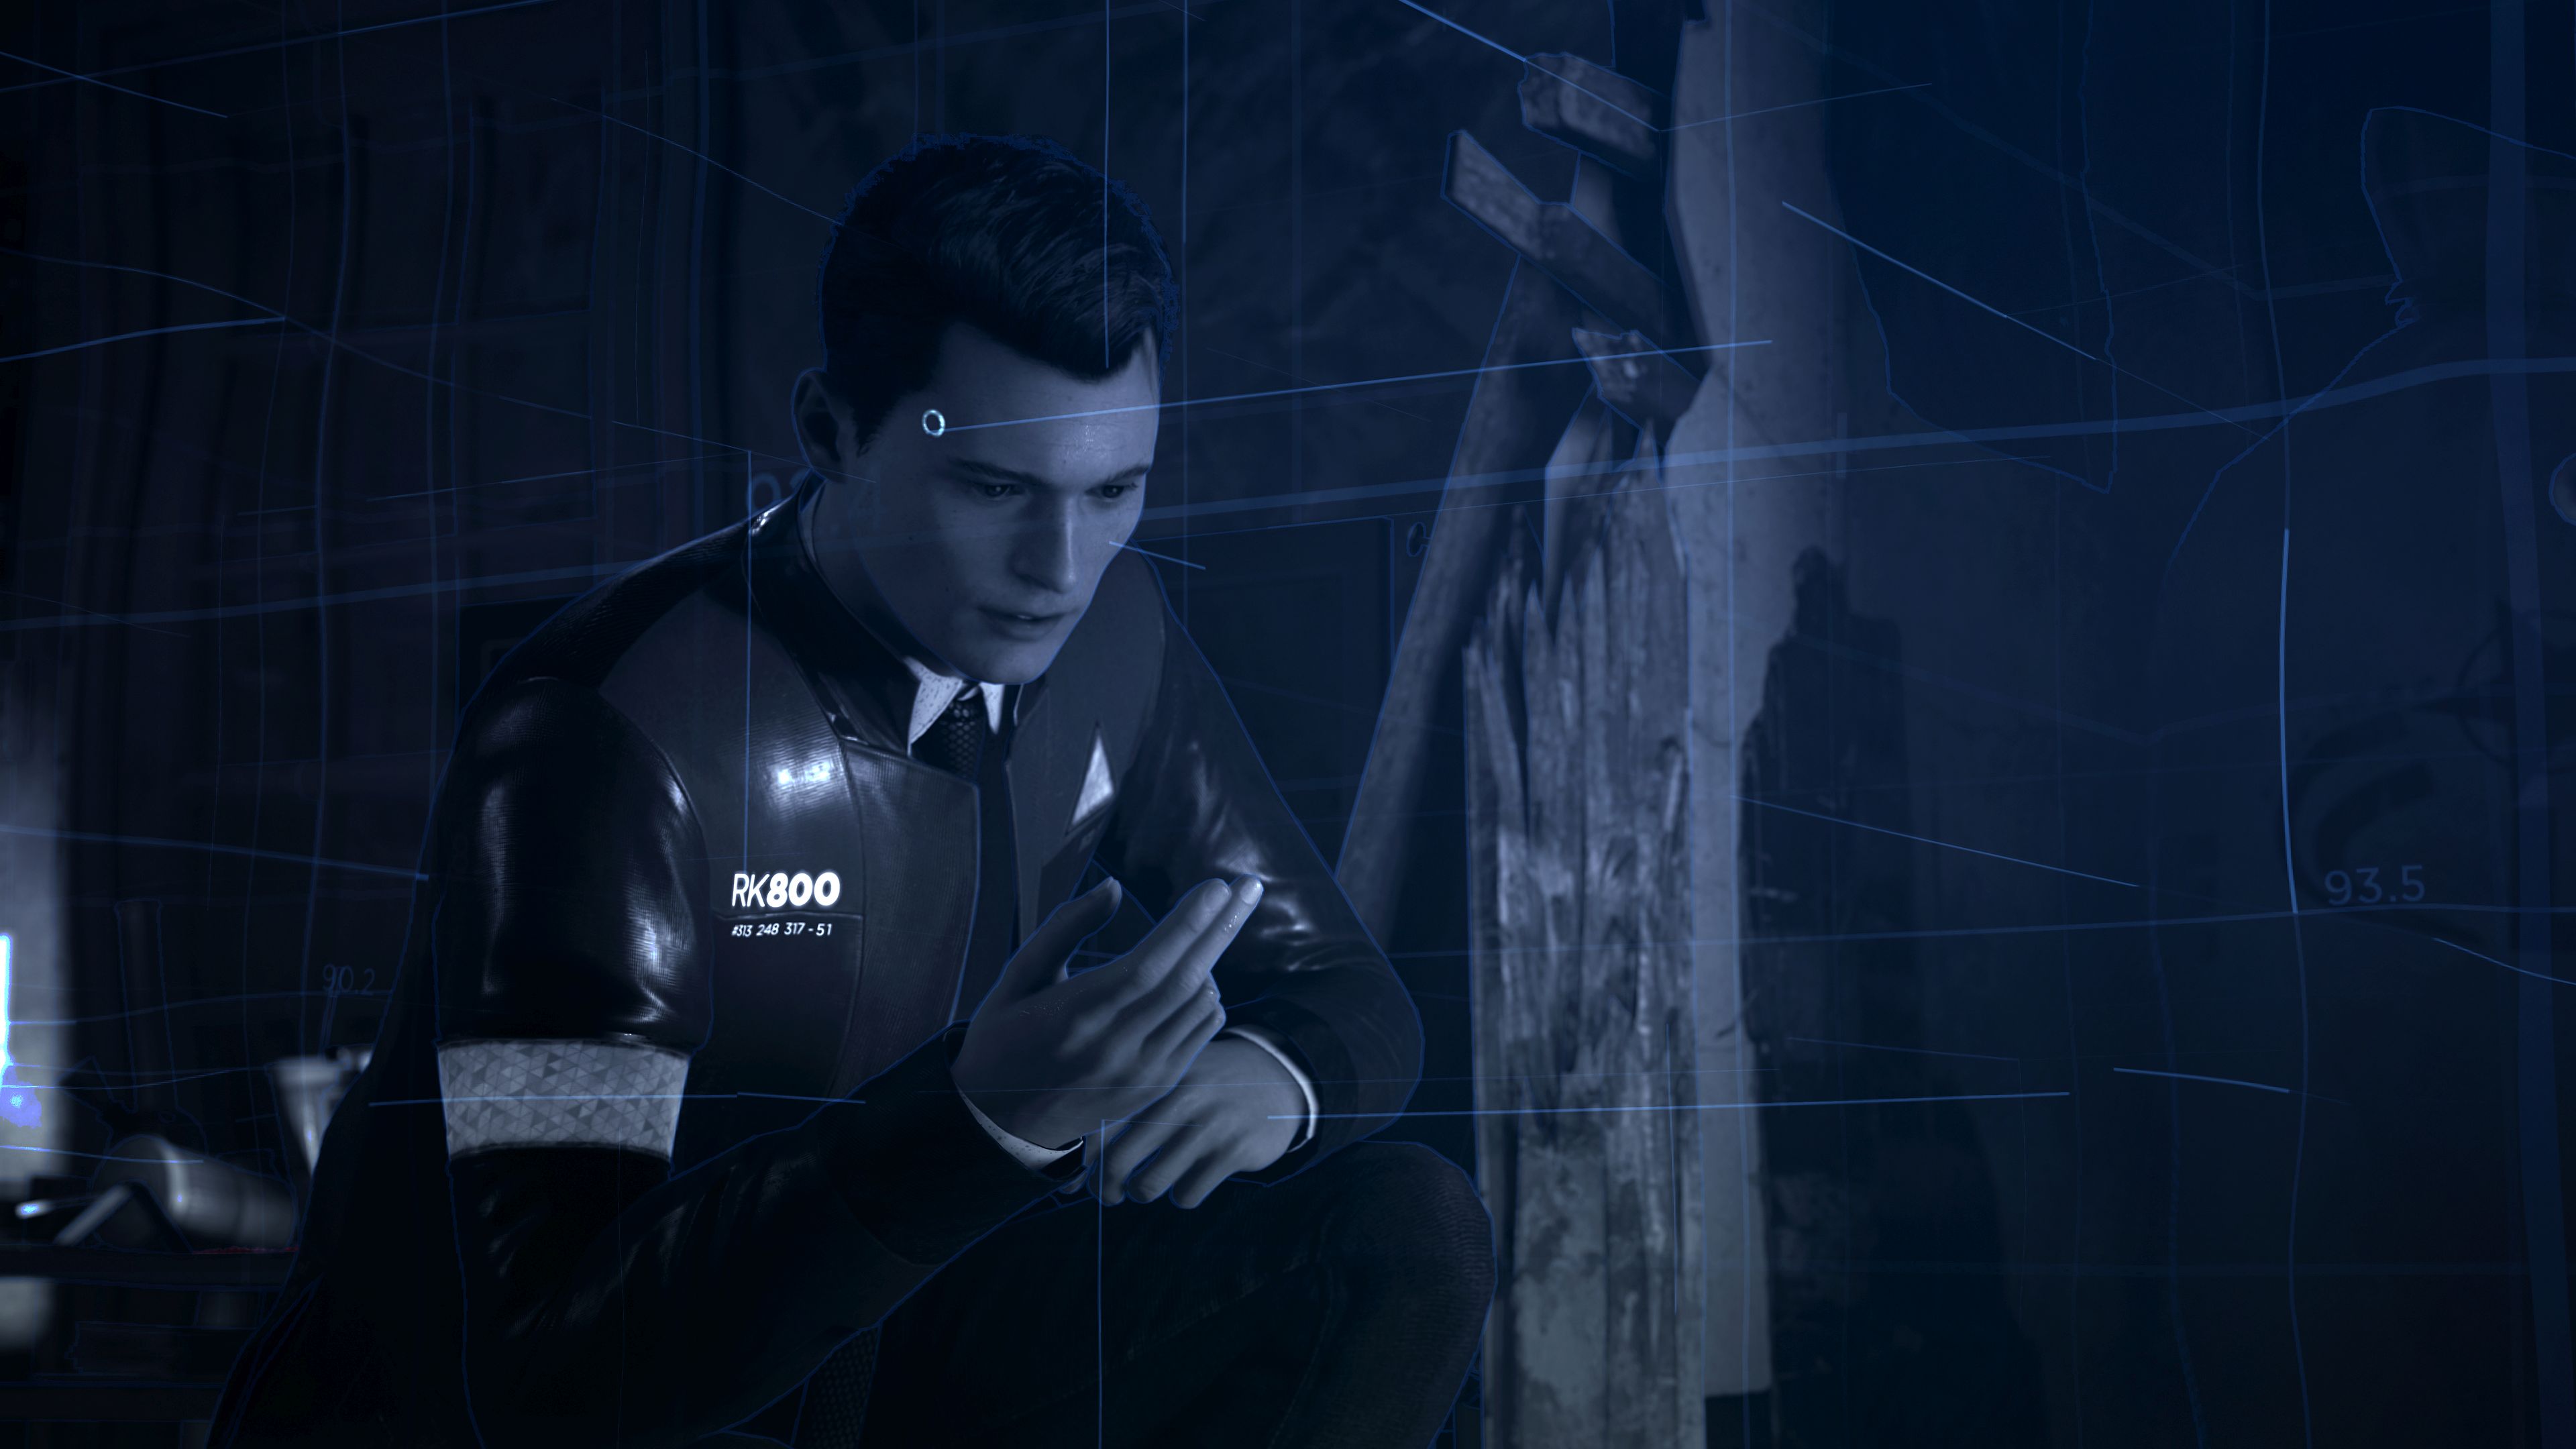 Connor Detroit Become Human 3840x2160